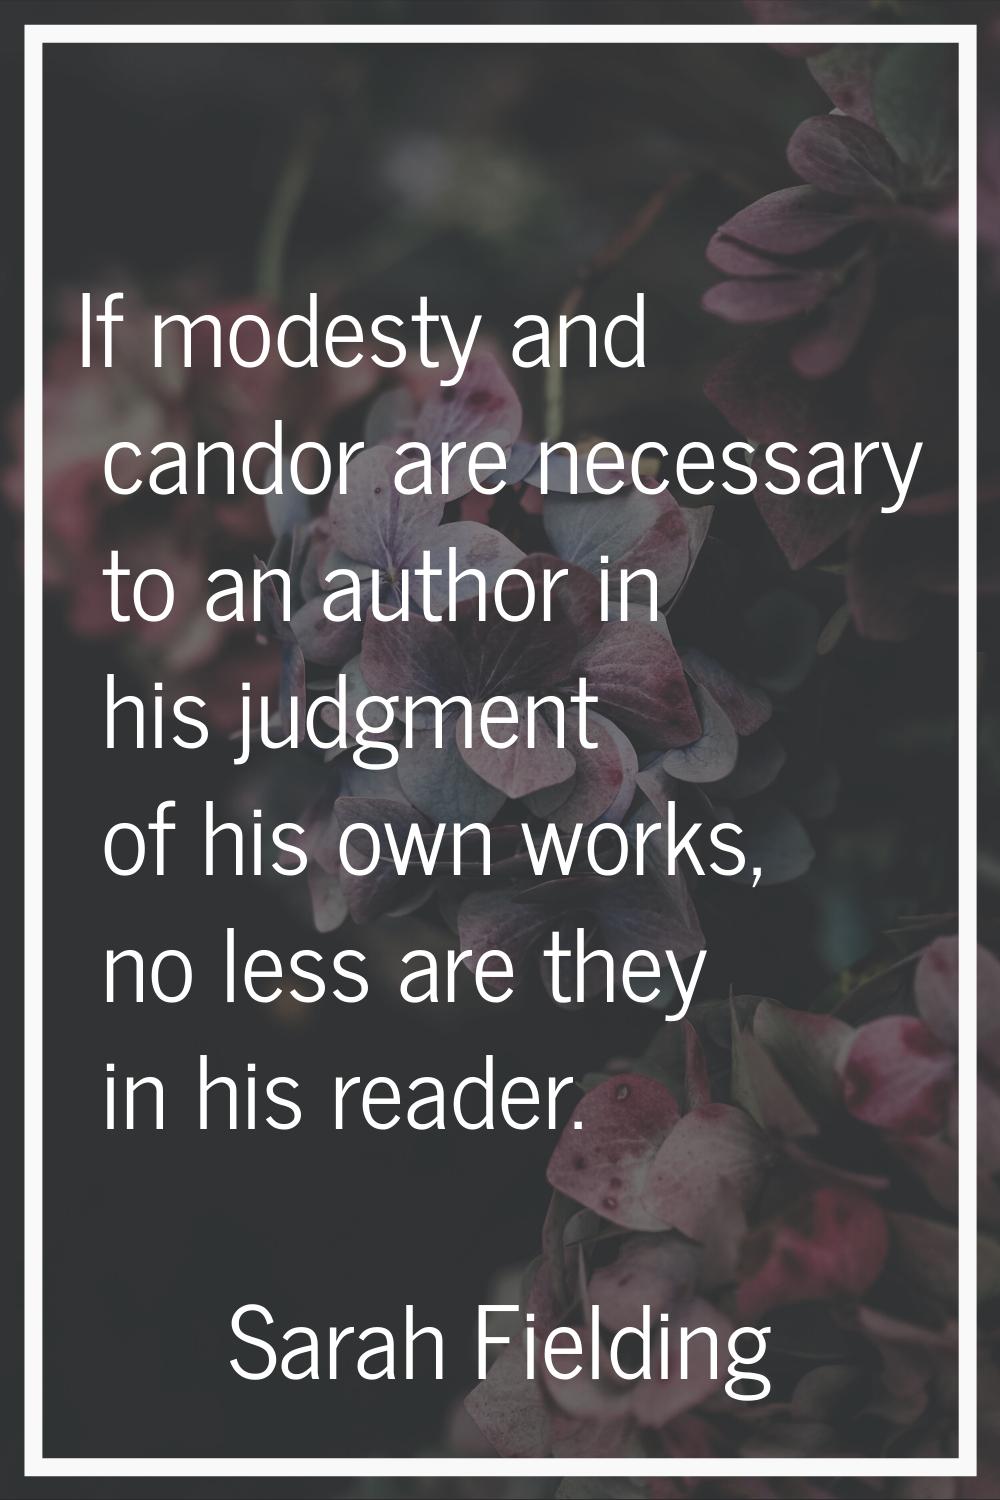 If modesty and candor are necessary to an author in his judgment of his own works, no less are they